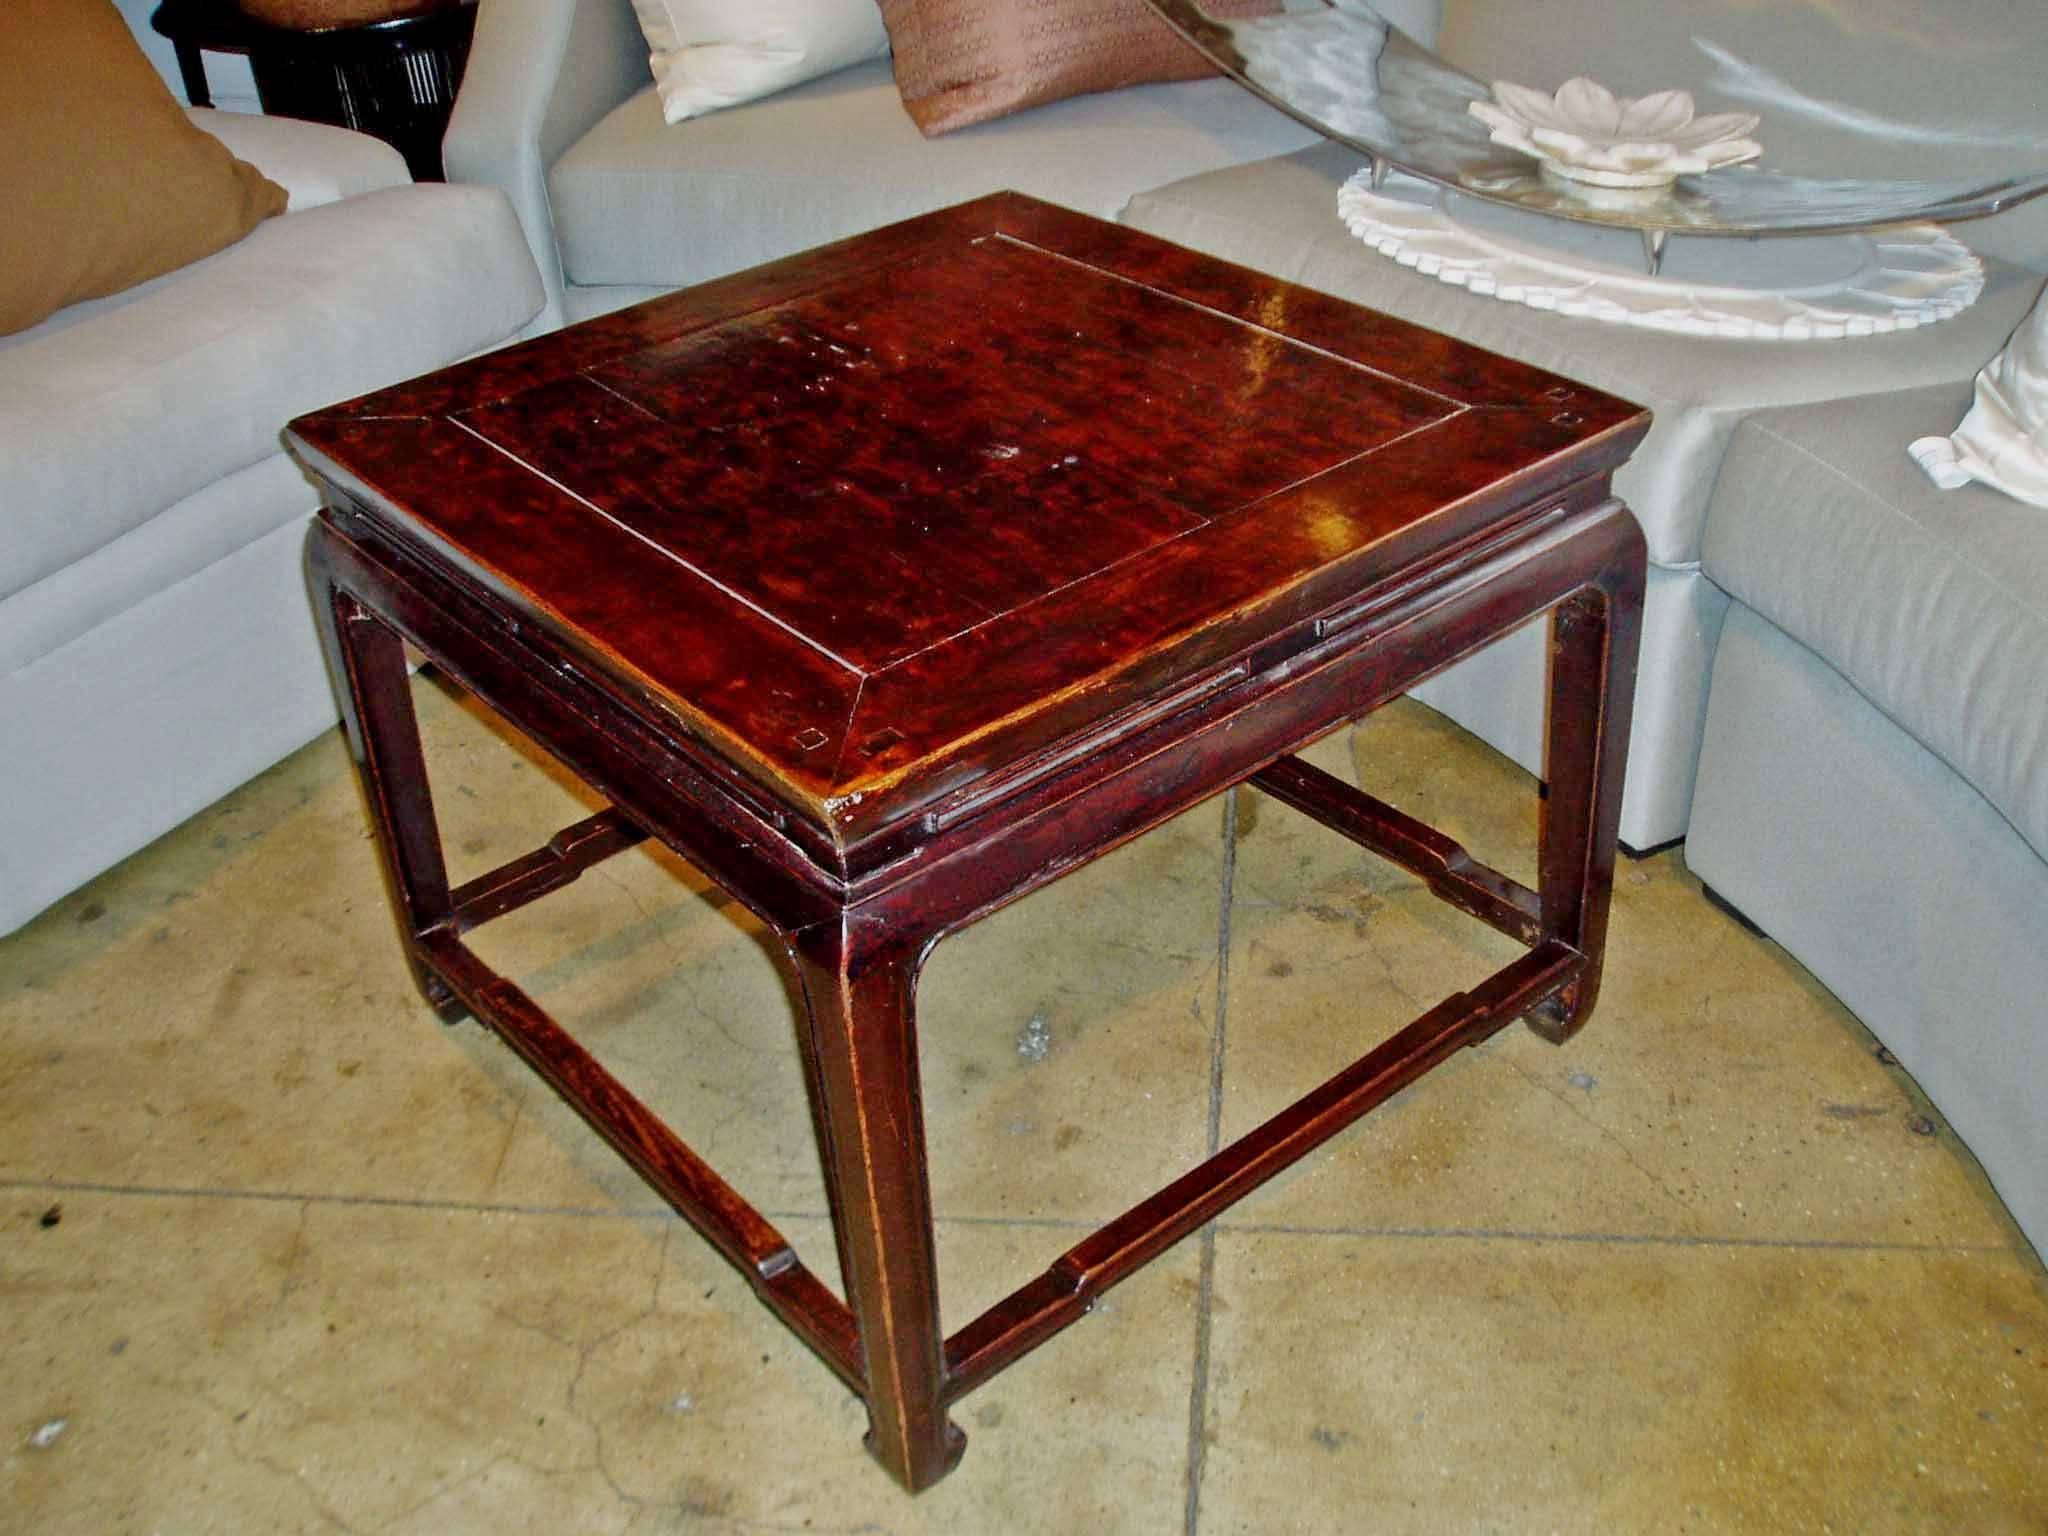 A square coffee table from China, with slotted apron, corner legs and hump back stretchers, circa 1925. 